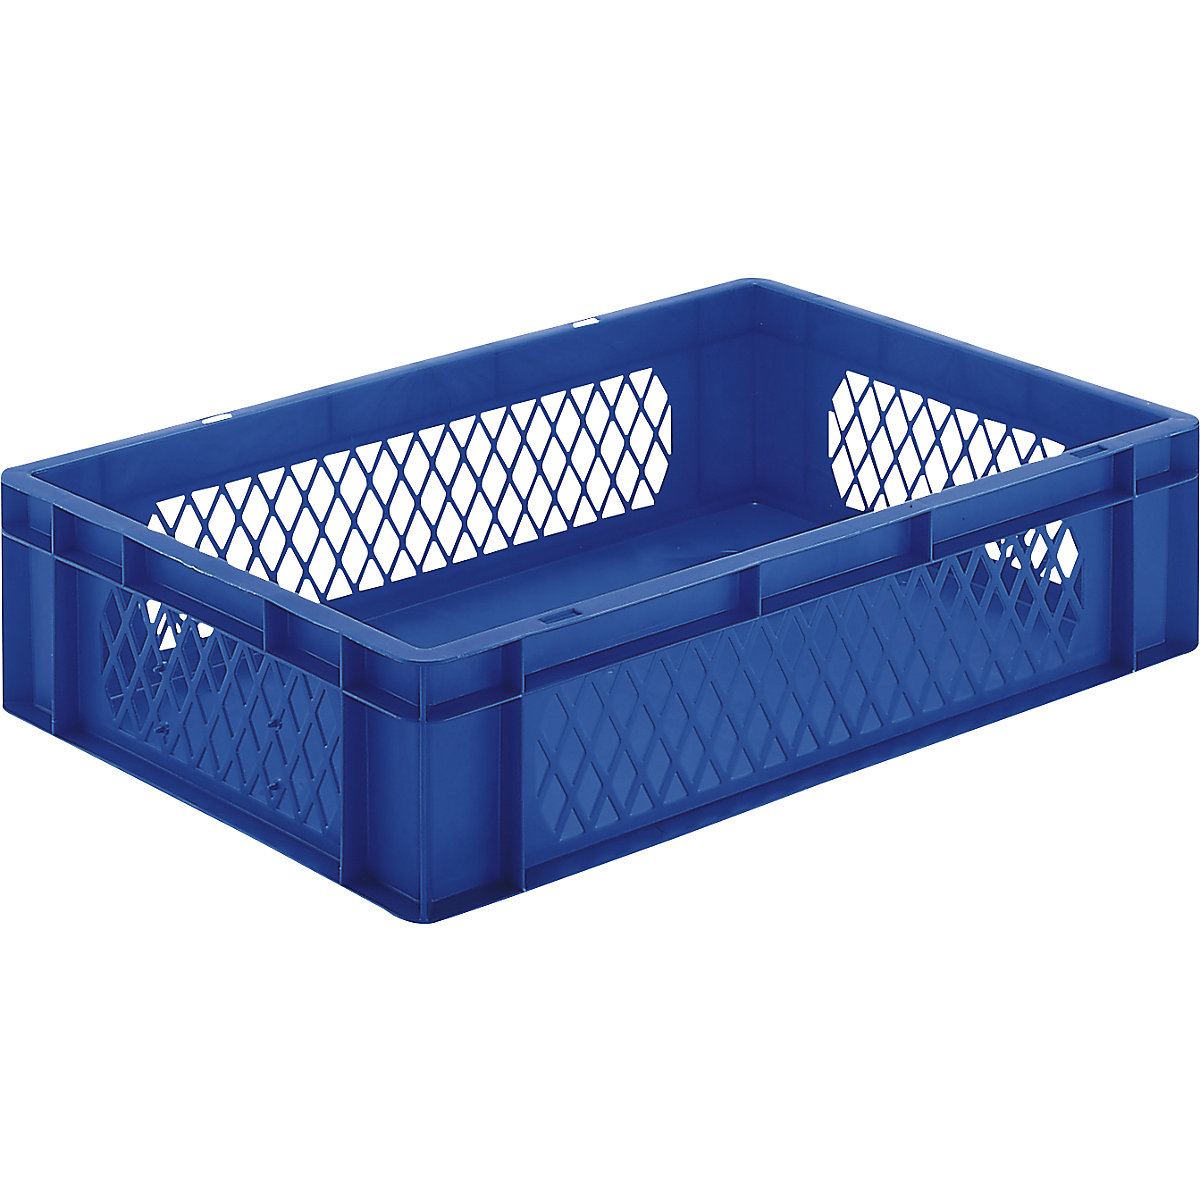 Euro stacking container, perforated walls, closed base, LxWxH 600 x 400 x 145 mm, blue, pack of 5-5